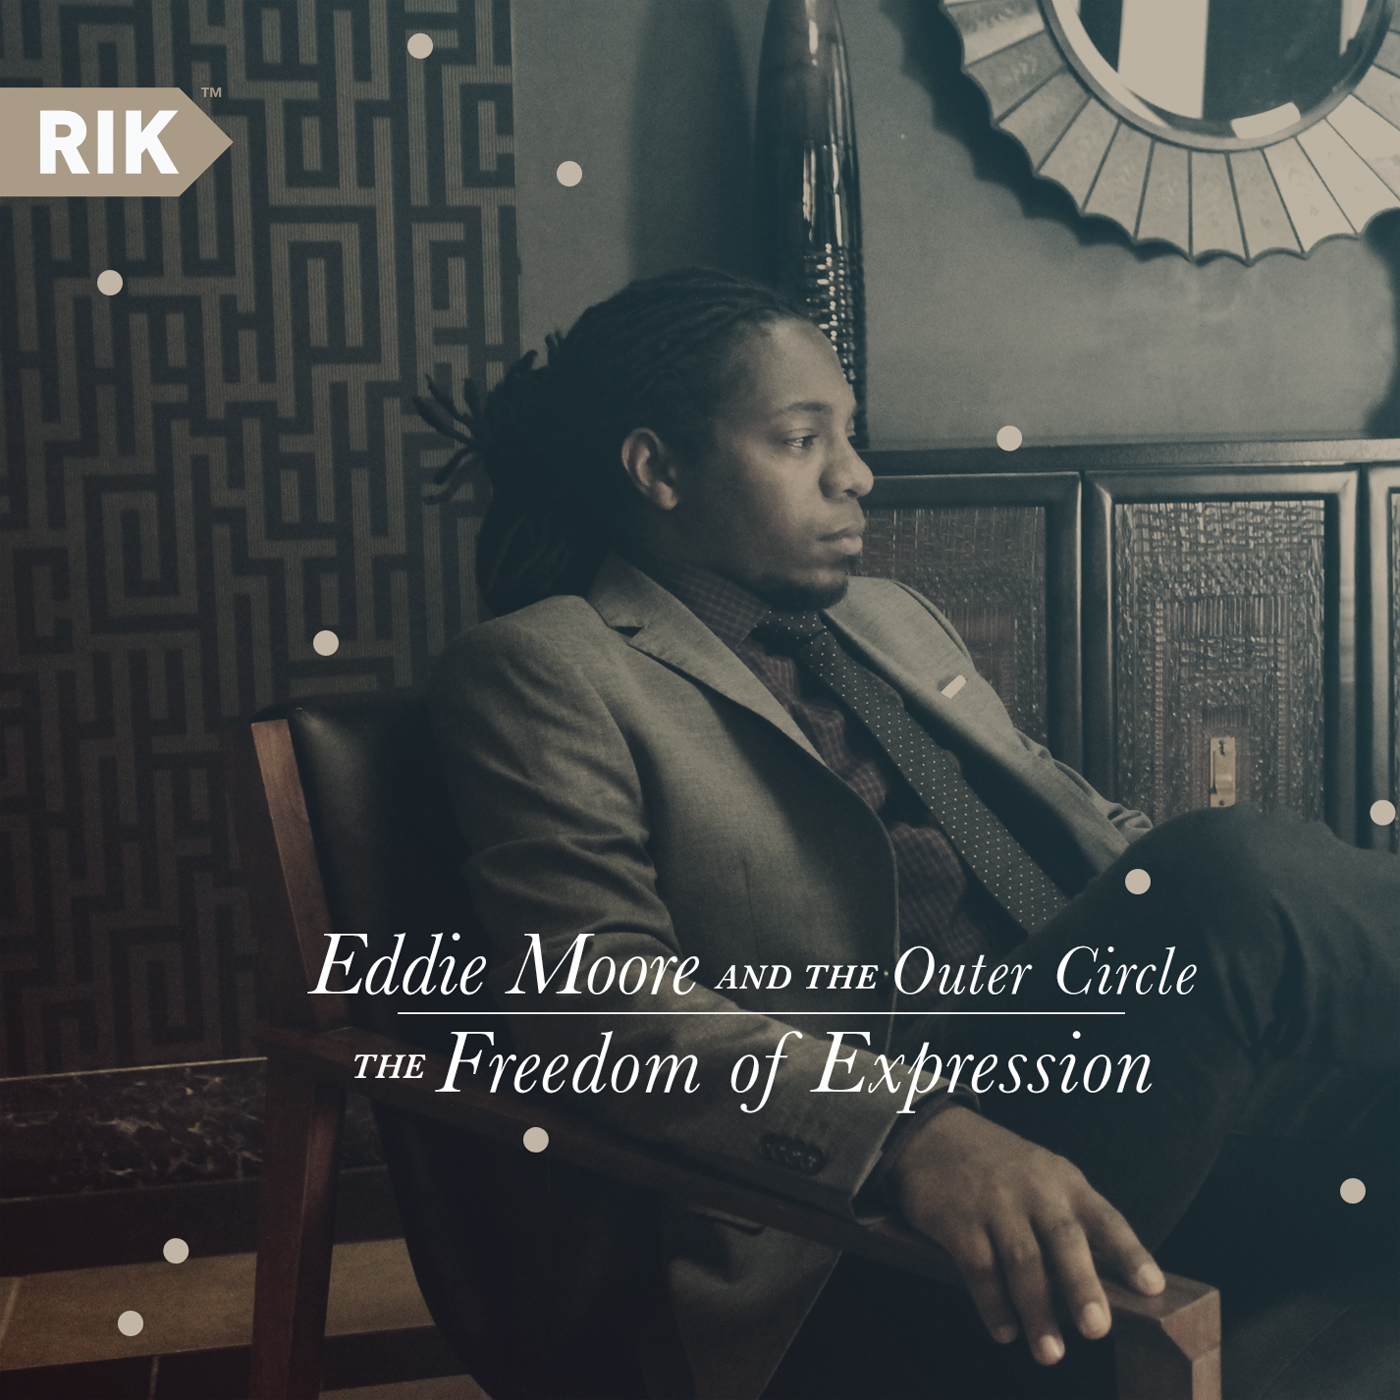 Eddie Moore and the Outer Circle — The Freedom of Expression